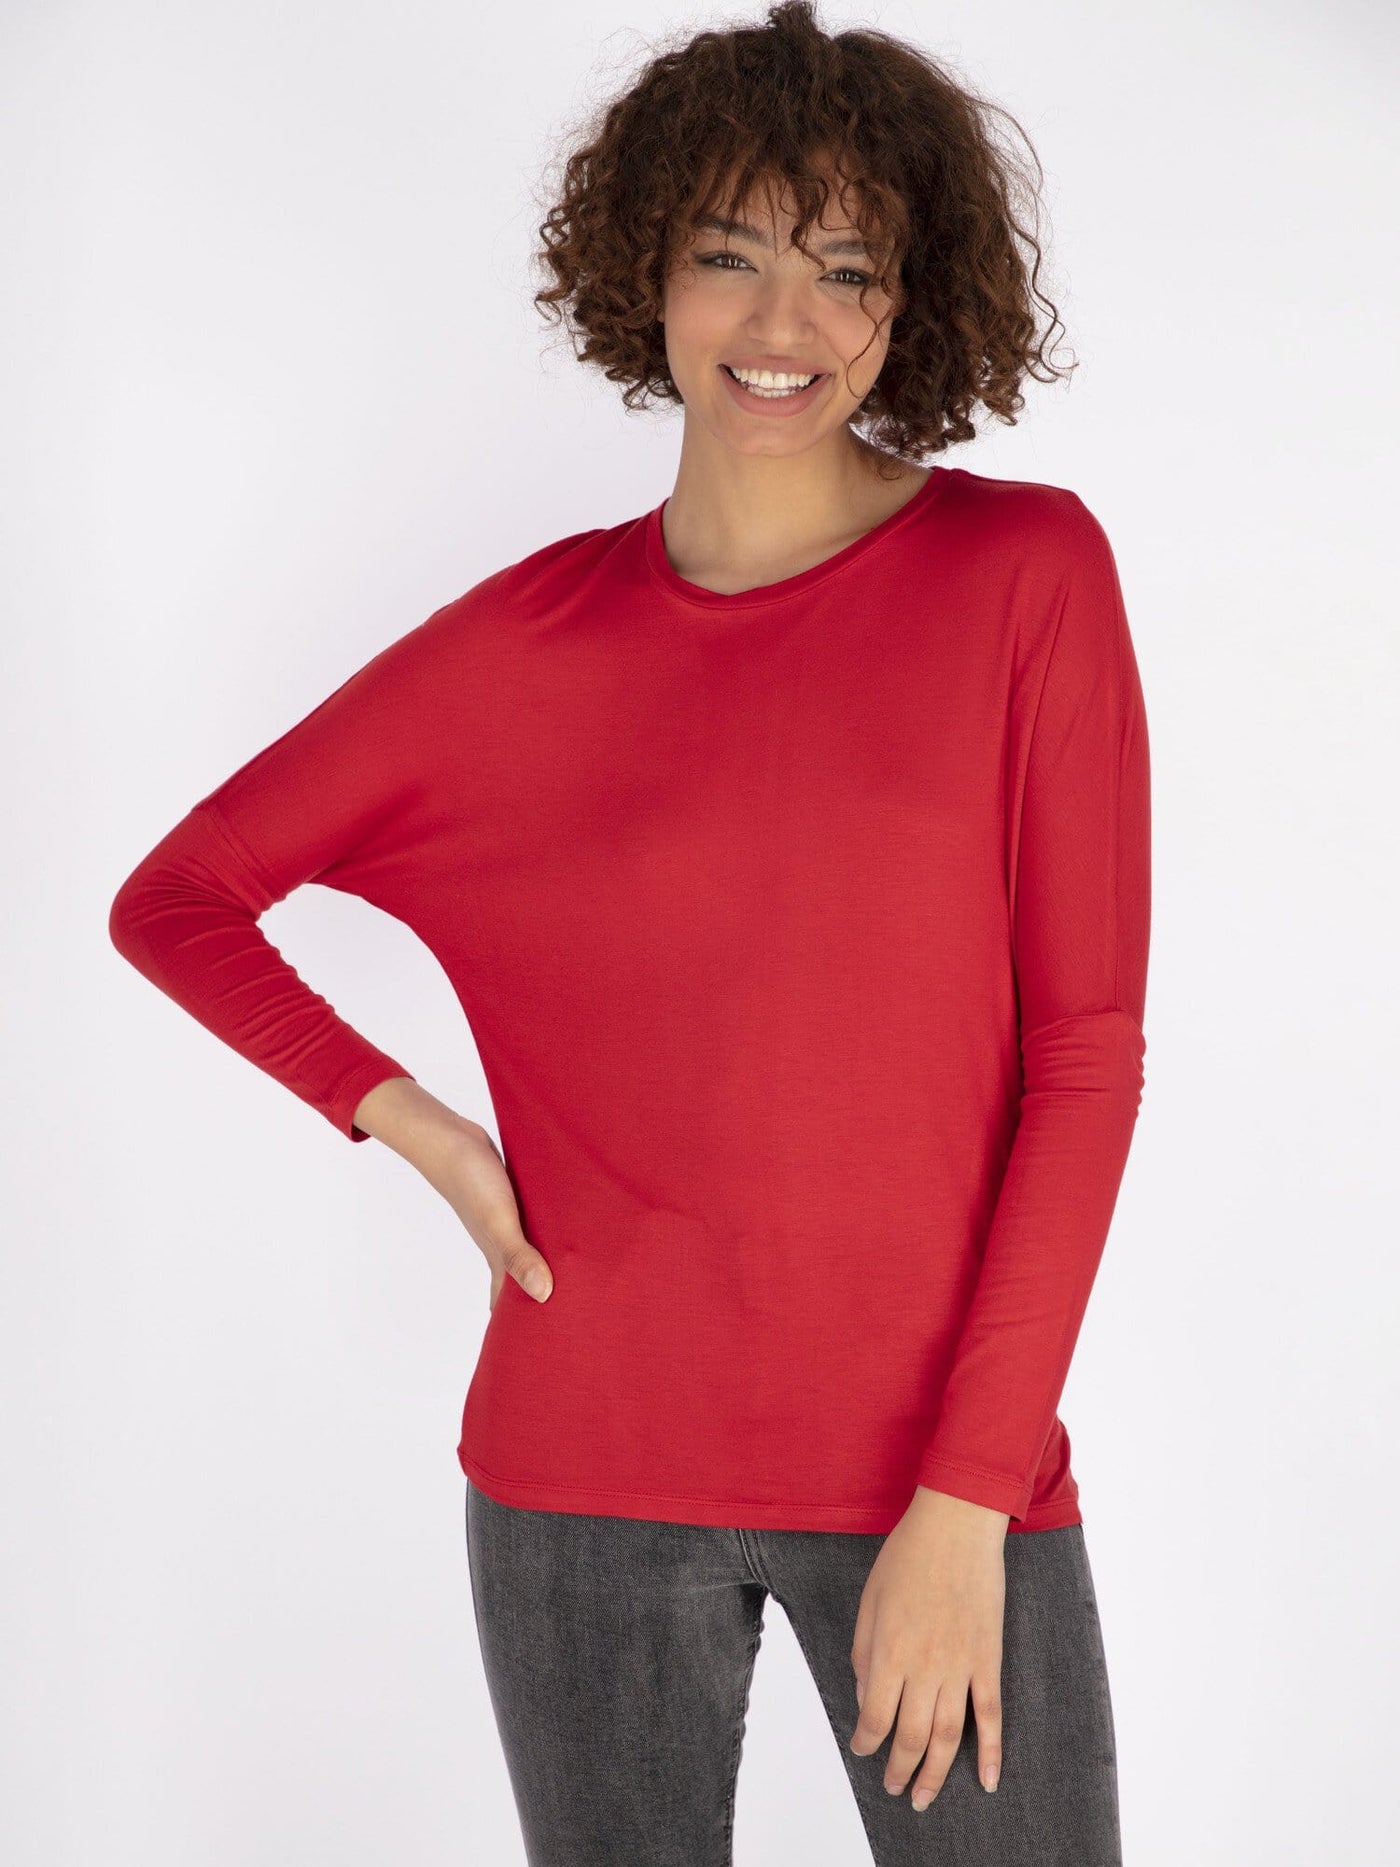 OR Tops & Blouses Dark Red / S Basic Long Batwing Sleeve Top